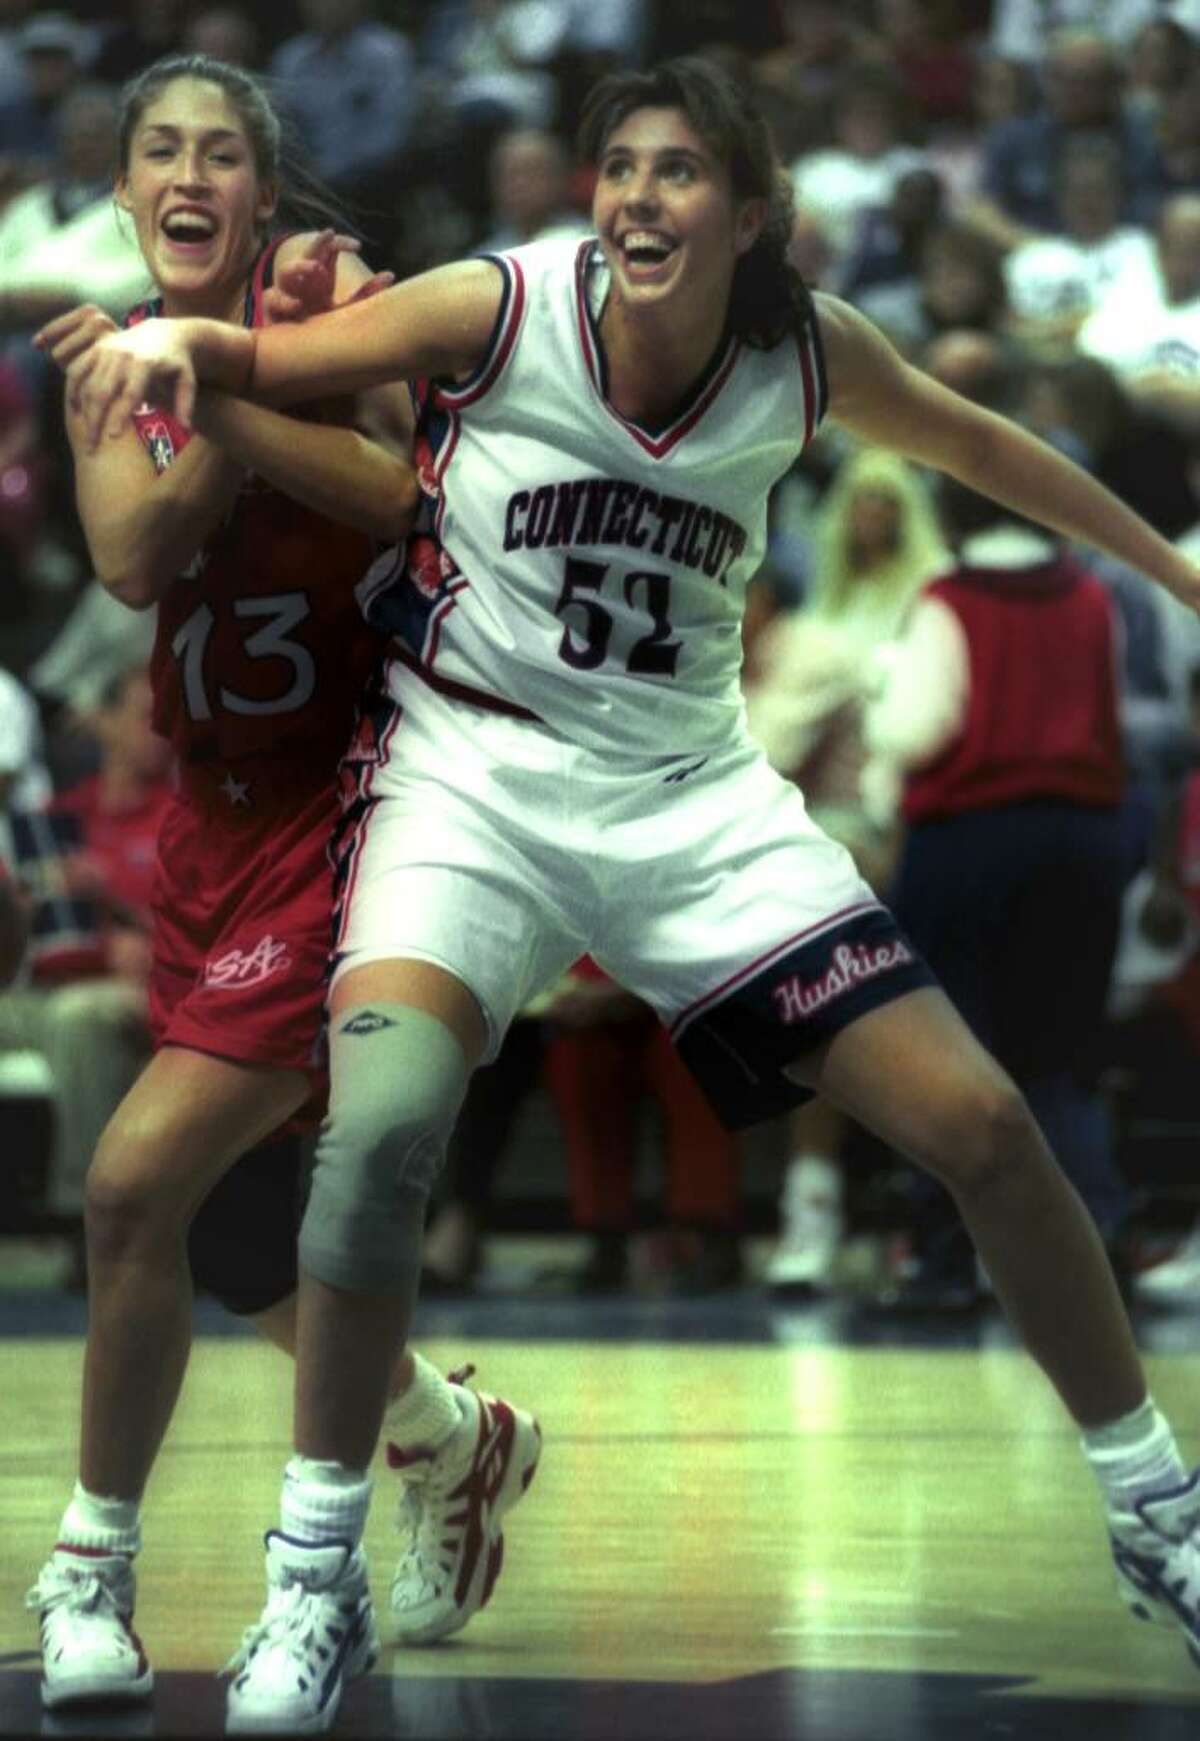 University of Connecticut basketball player Kara Wolter in action against former teammate Rebecca Lobo, member of the U.S. Olympic team, date and location unknown.